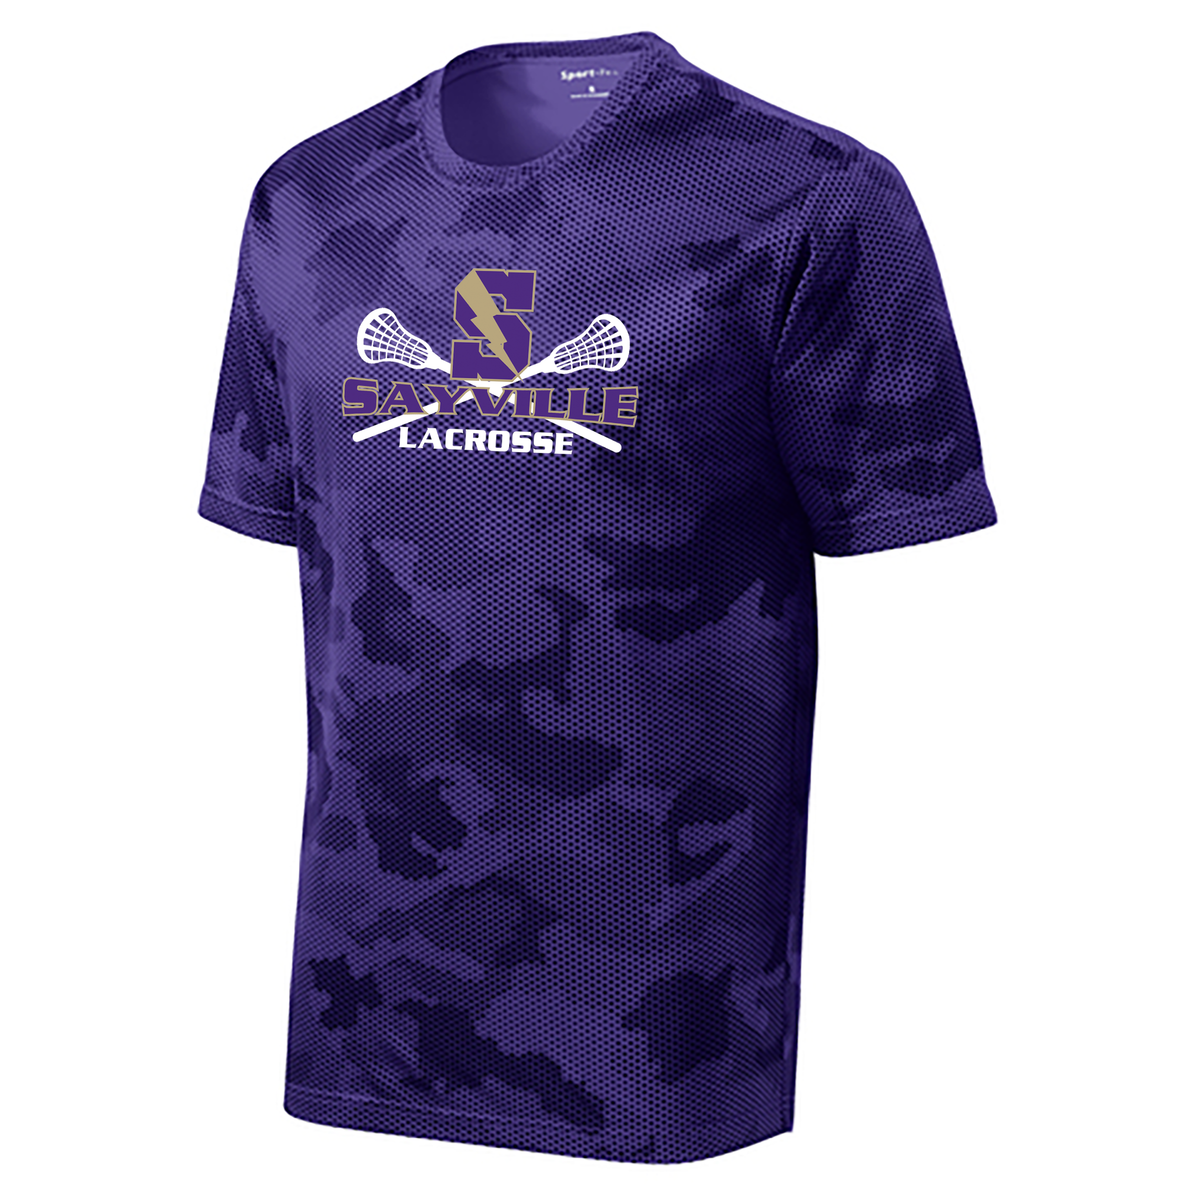 Sayville Lacrosse Youth CamoHex Tee